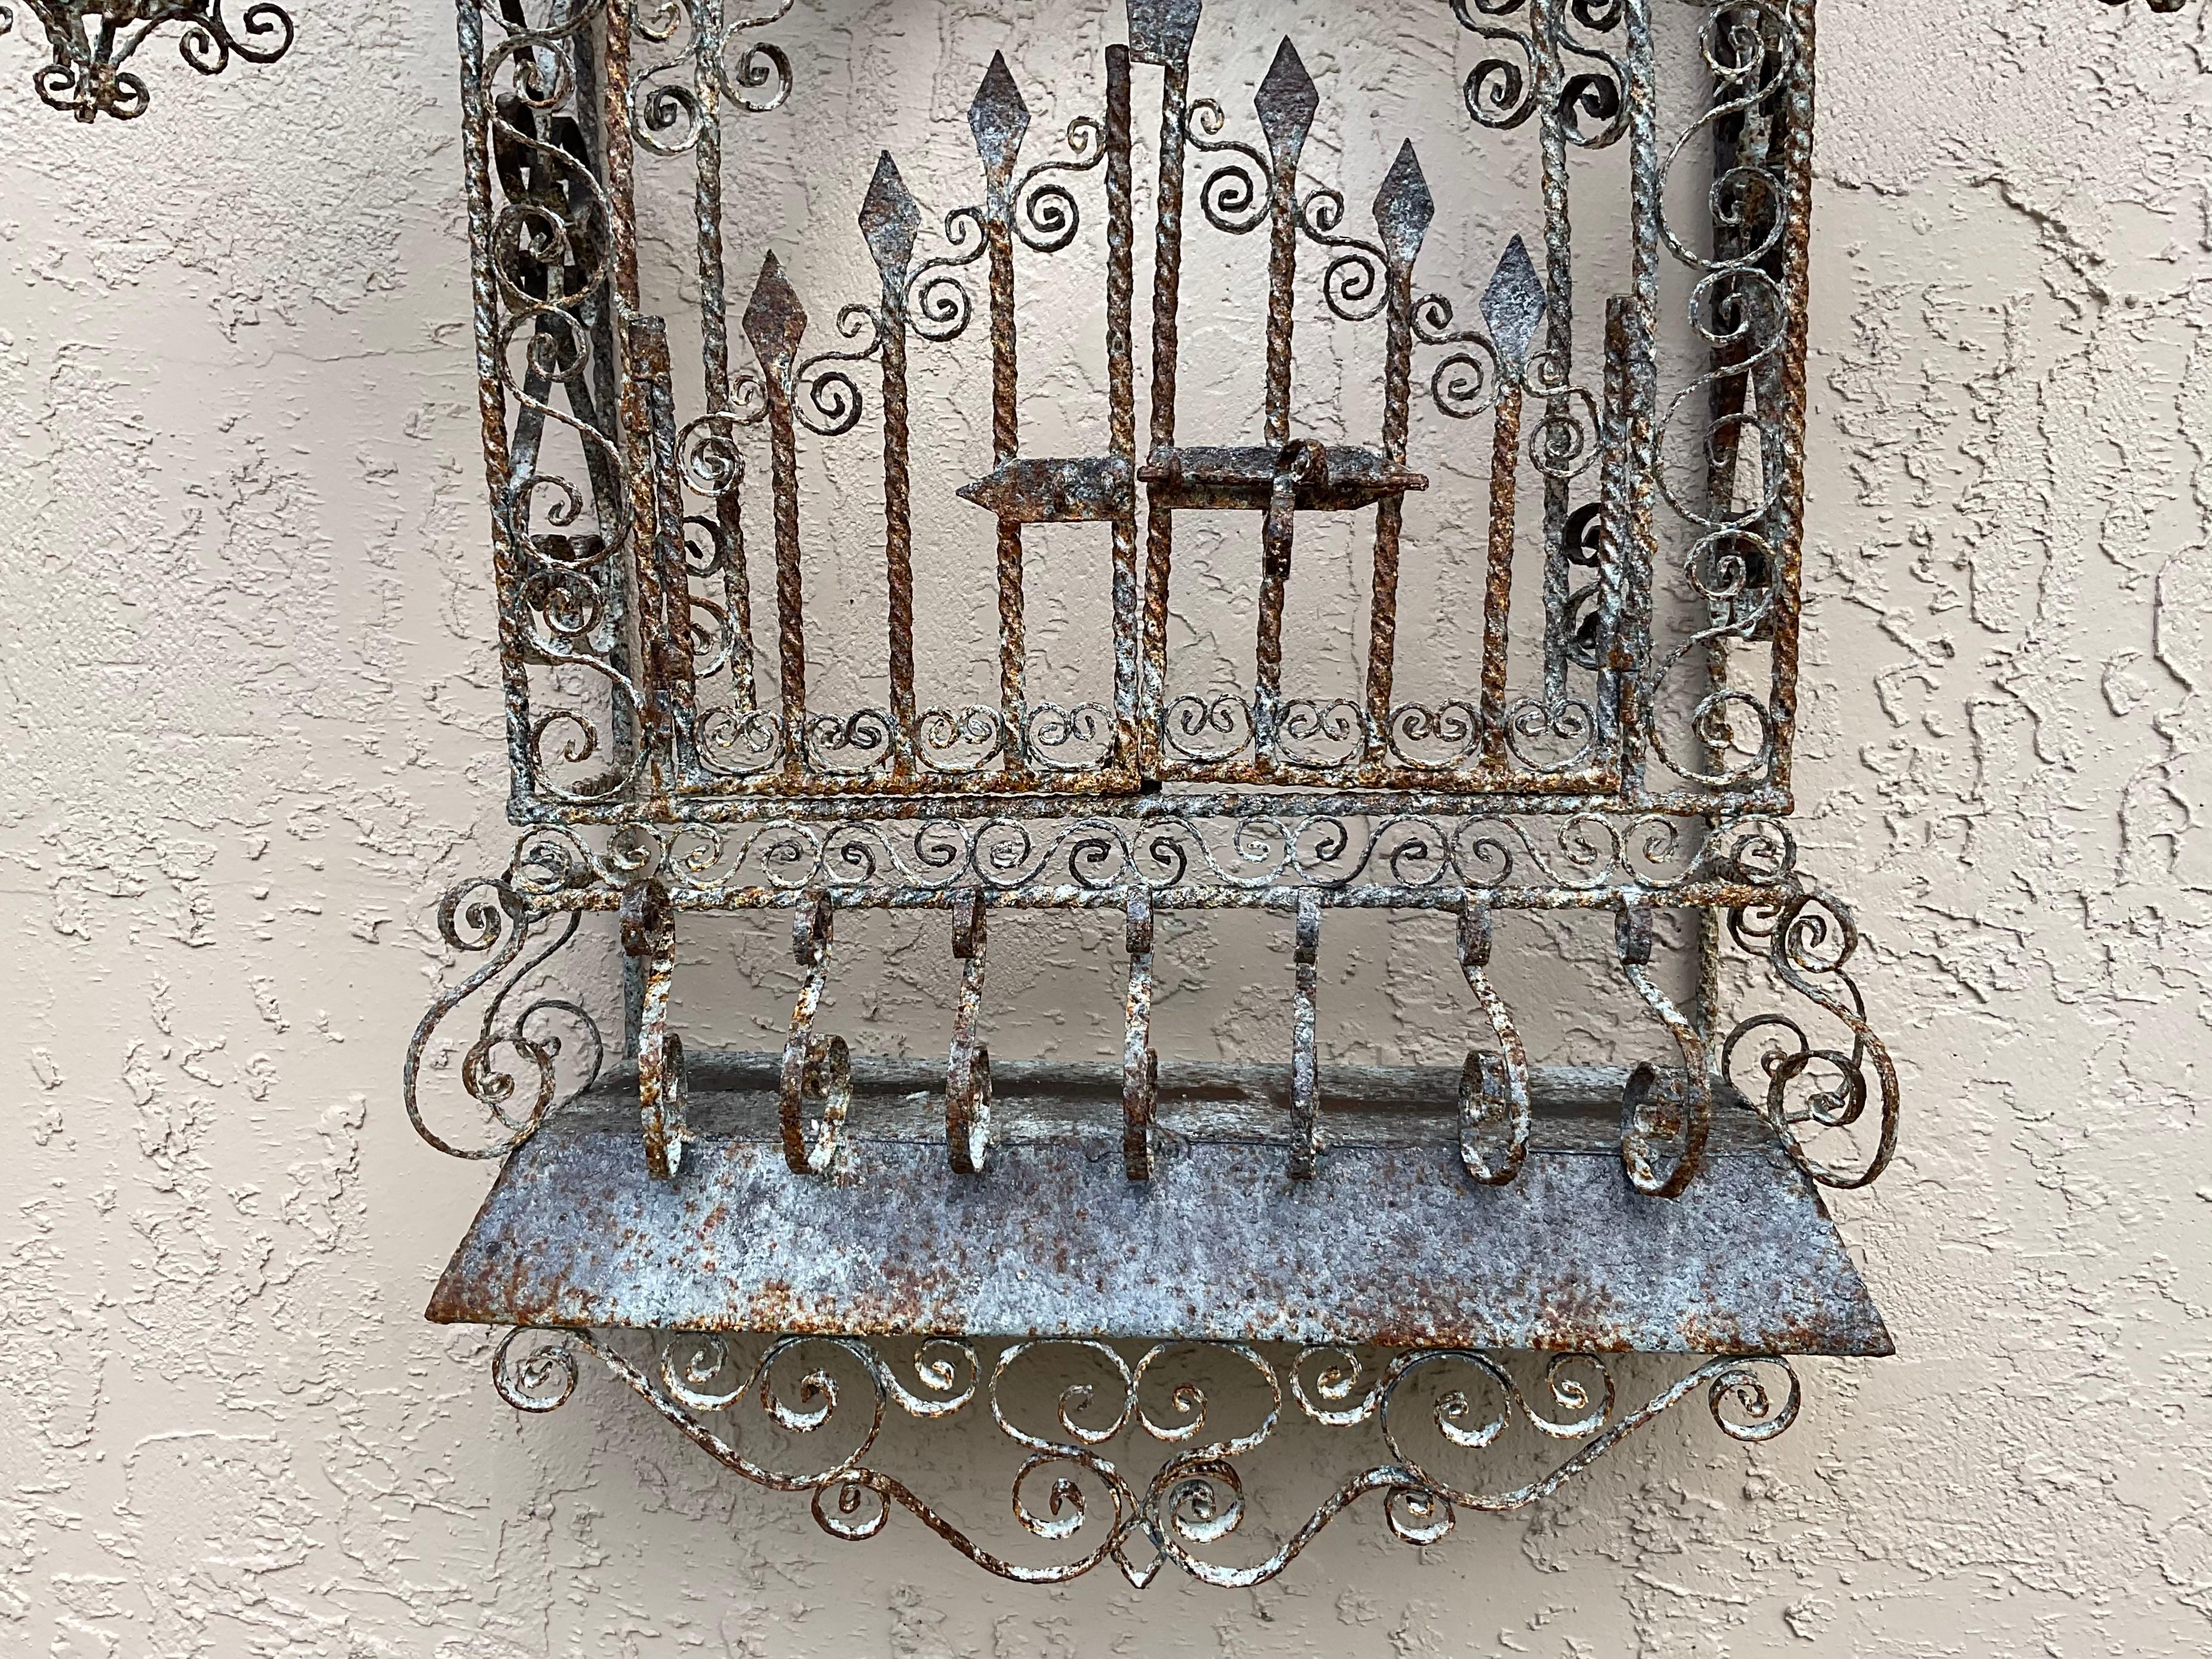 Hand-Crafted Vintage Wall Hanging Palm Beach Wrought Iron Gate Mizner Style For Sale